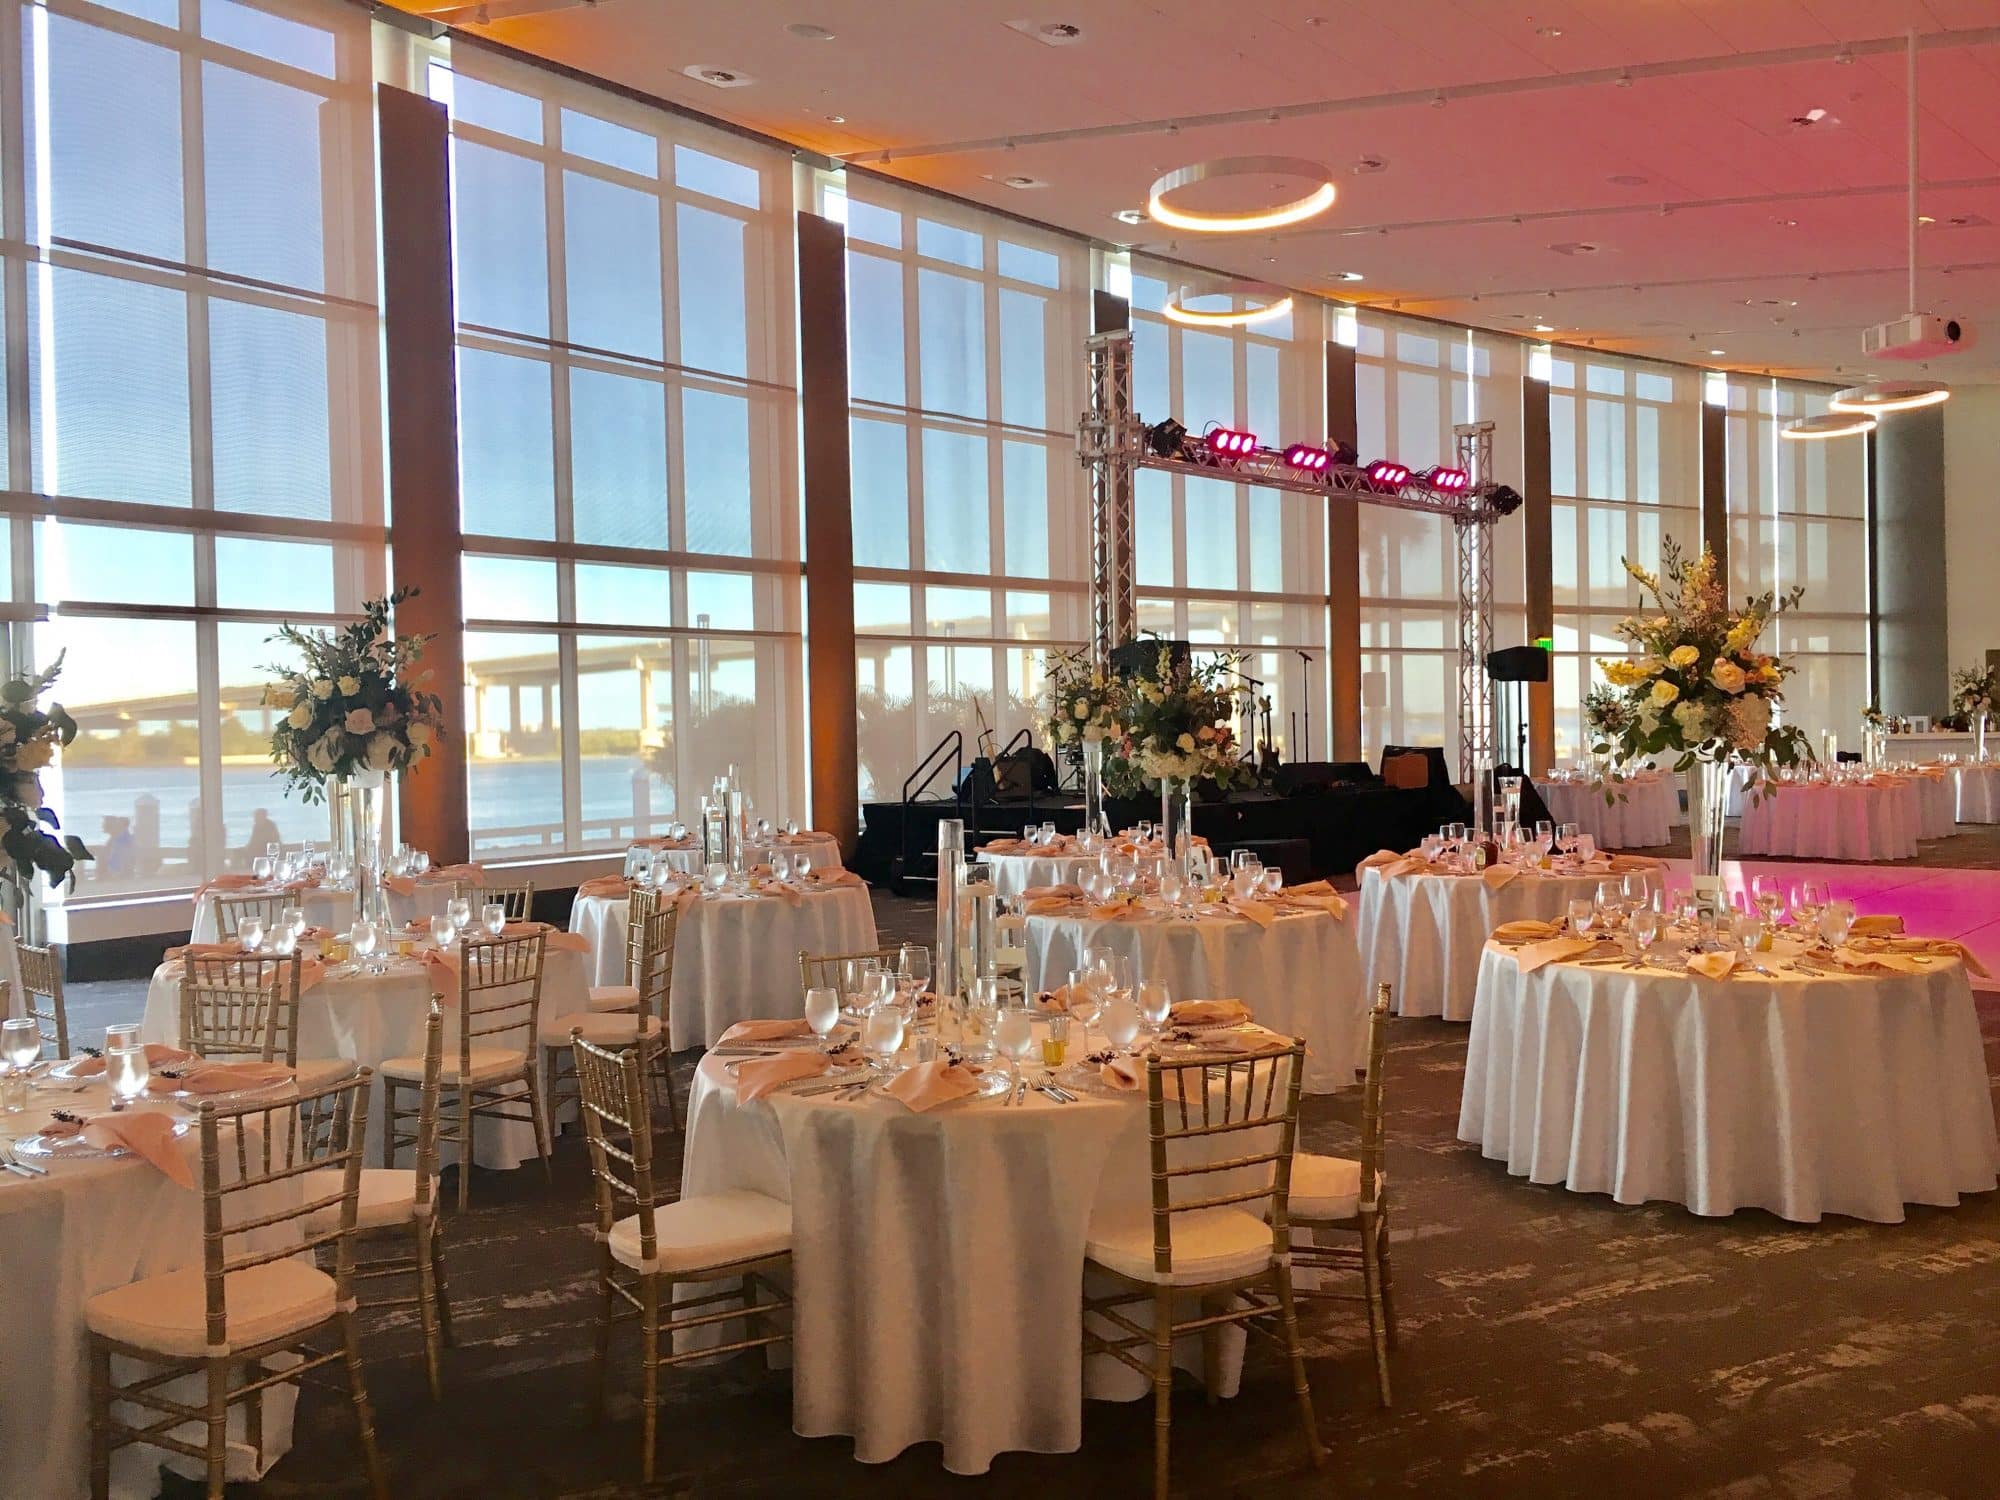 Brannon Center - reception hall lined with floor-to-ceiling windows